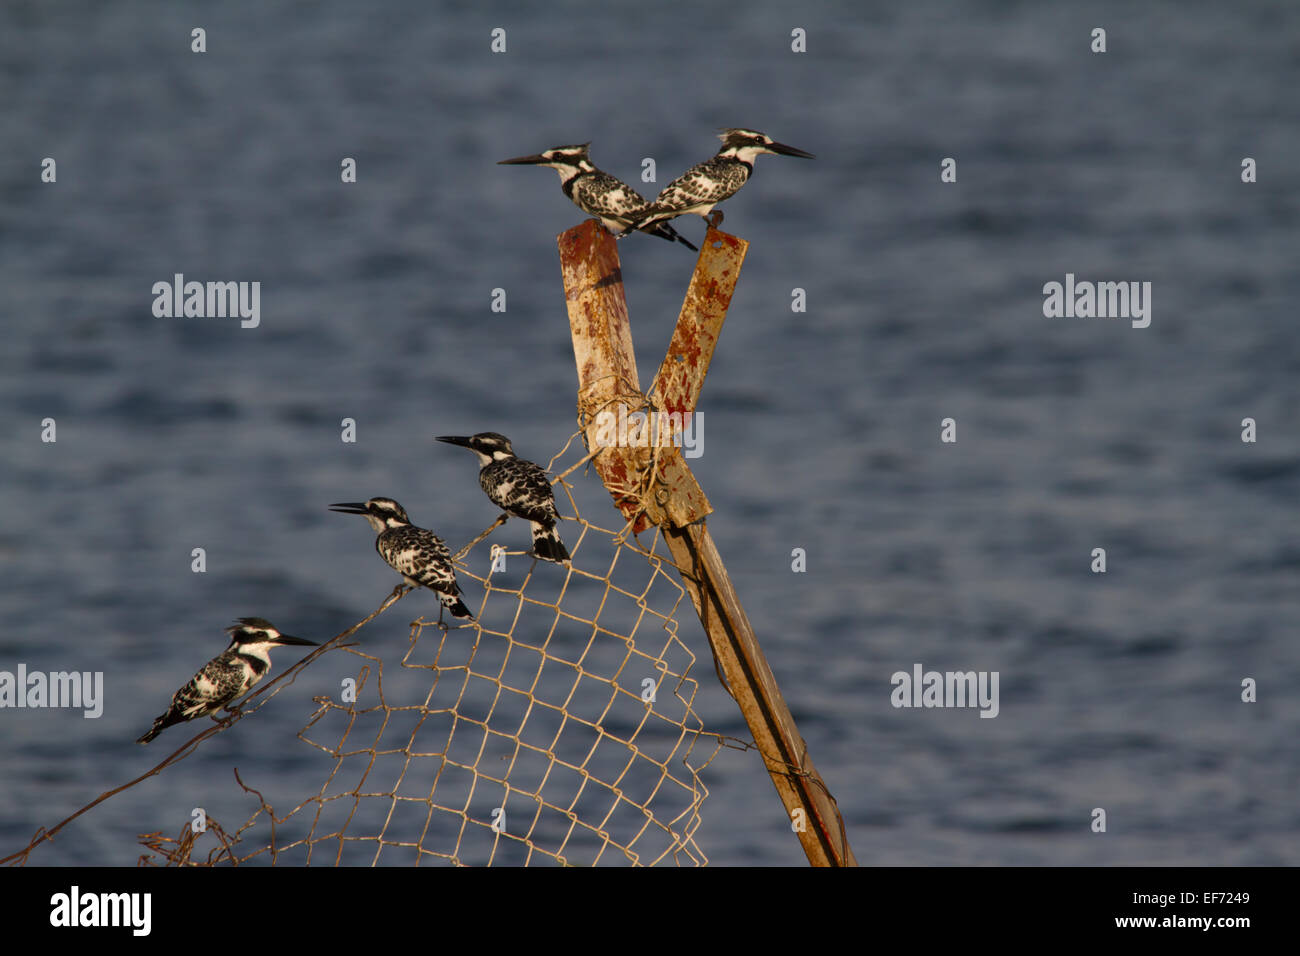 Pied Kingfishers (Ceryle rudis) perched on a fence Stock Photo